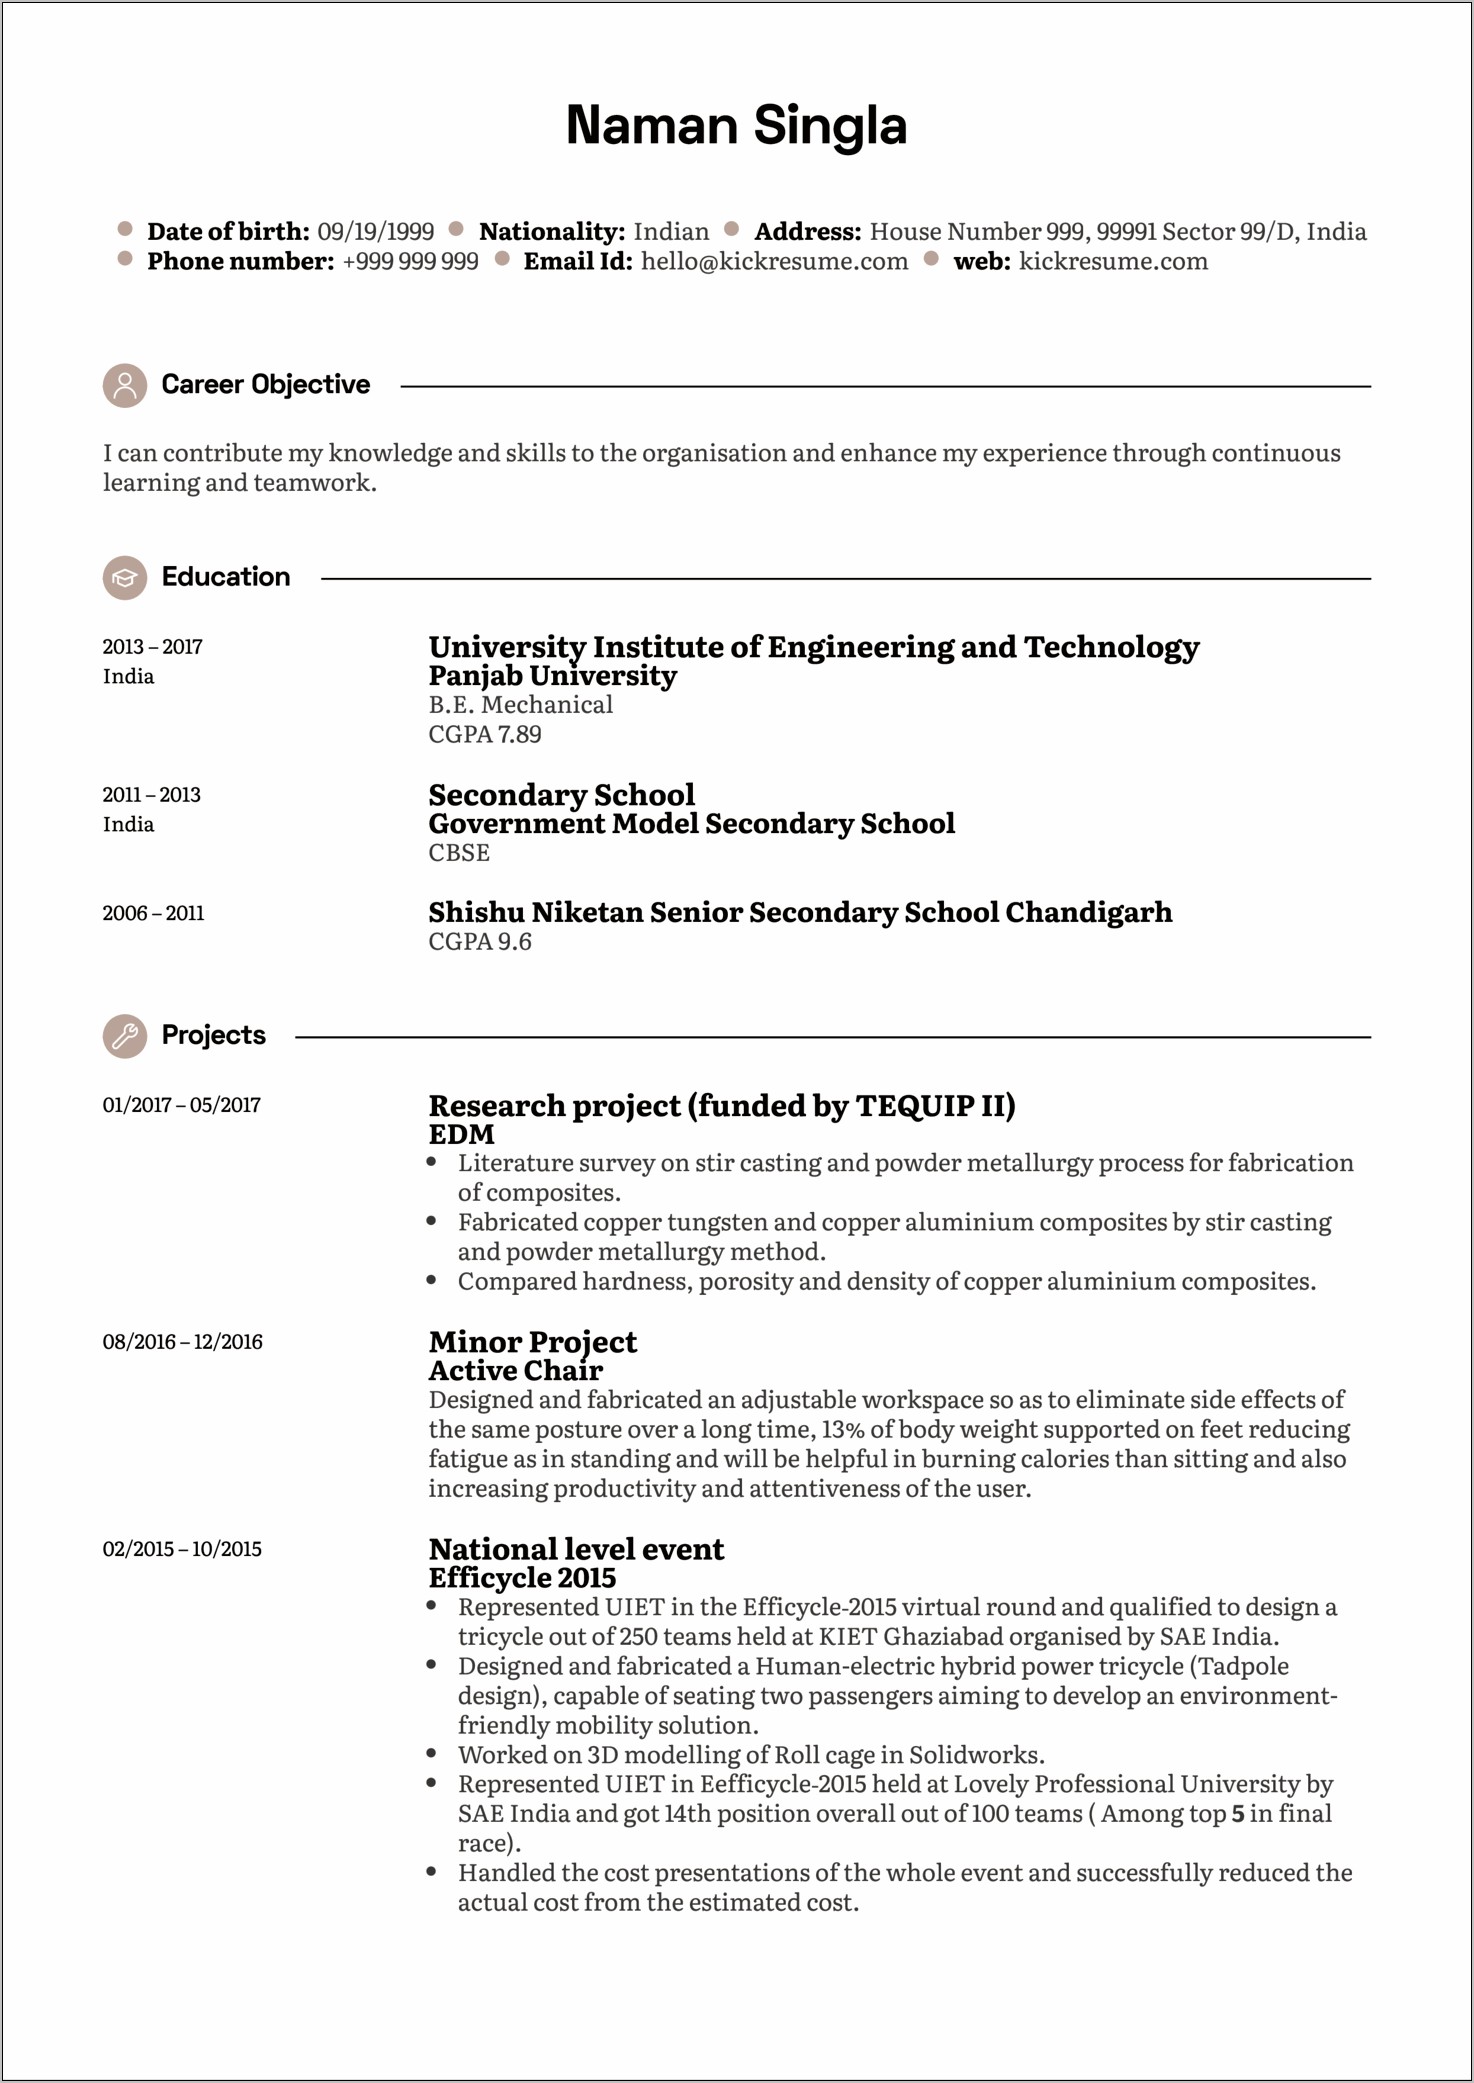 Resume Objective For A Research Position